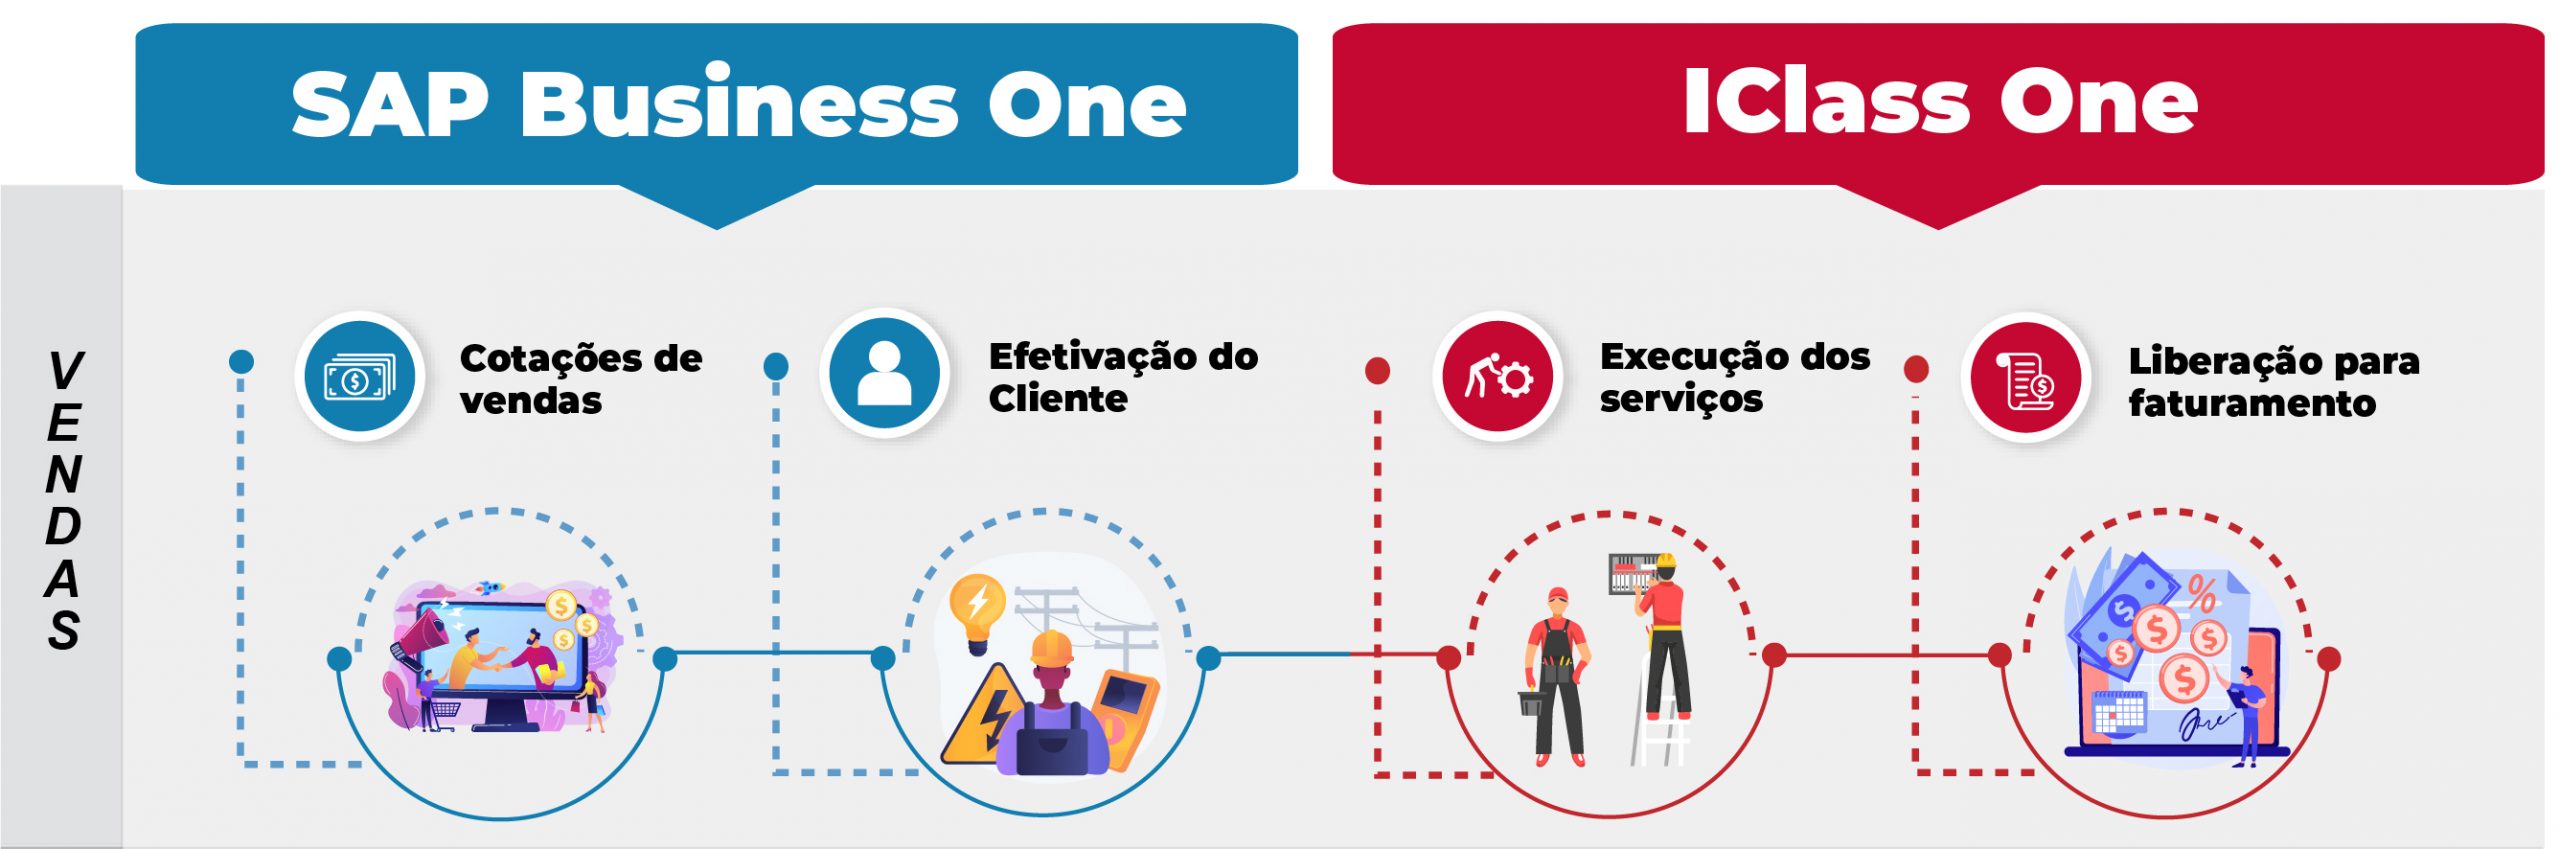 FLUXO ICLASS ONE portugues 26 scaled Tecnologia SAP Business One